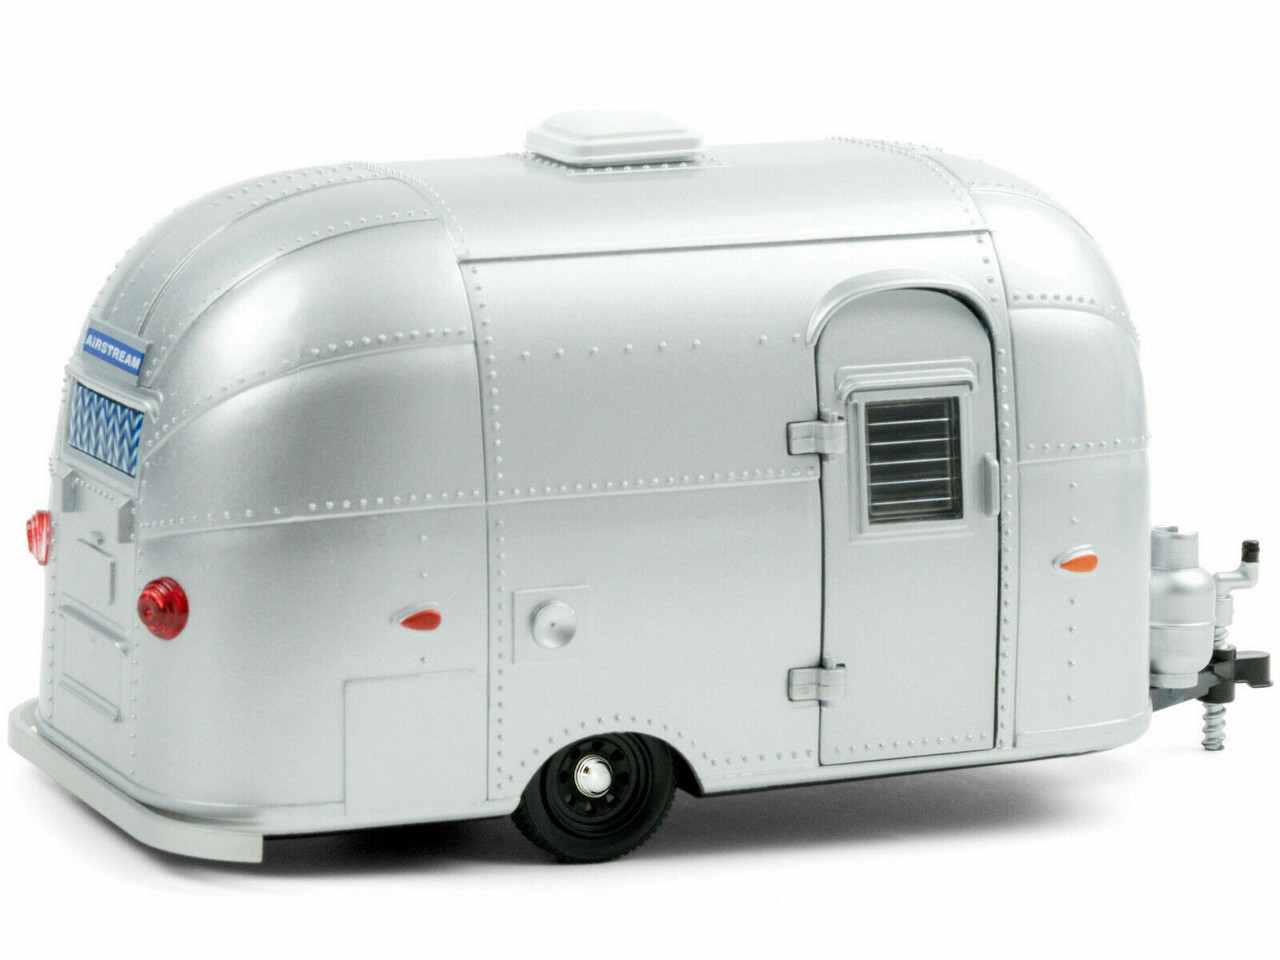 1/24 Greenlight Hitch & Tow Trailers Series 6 - Airstream 16’ Bambi Spor Diecast Model